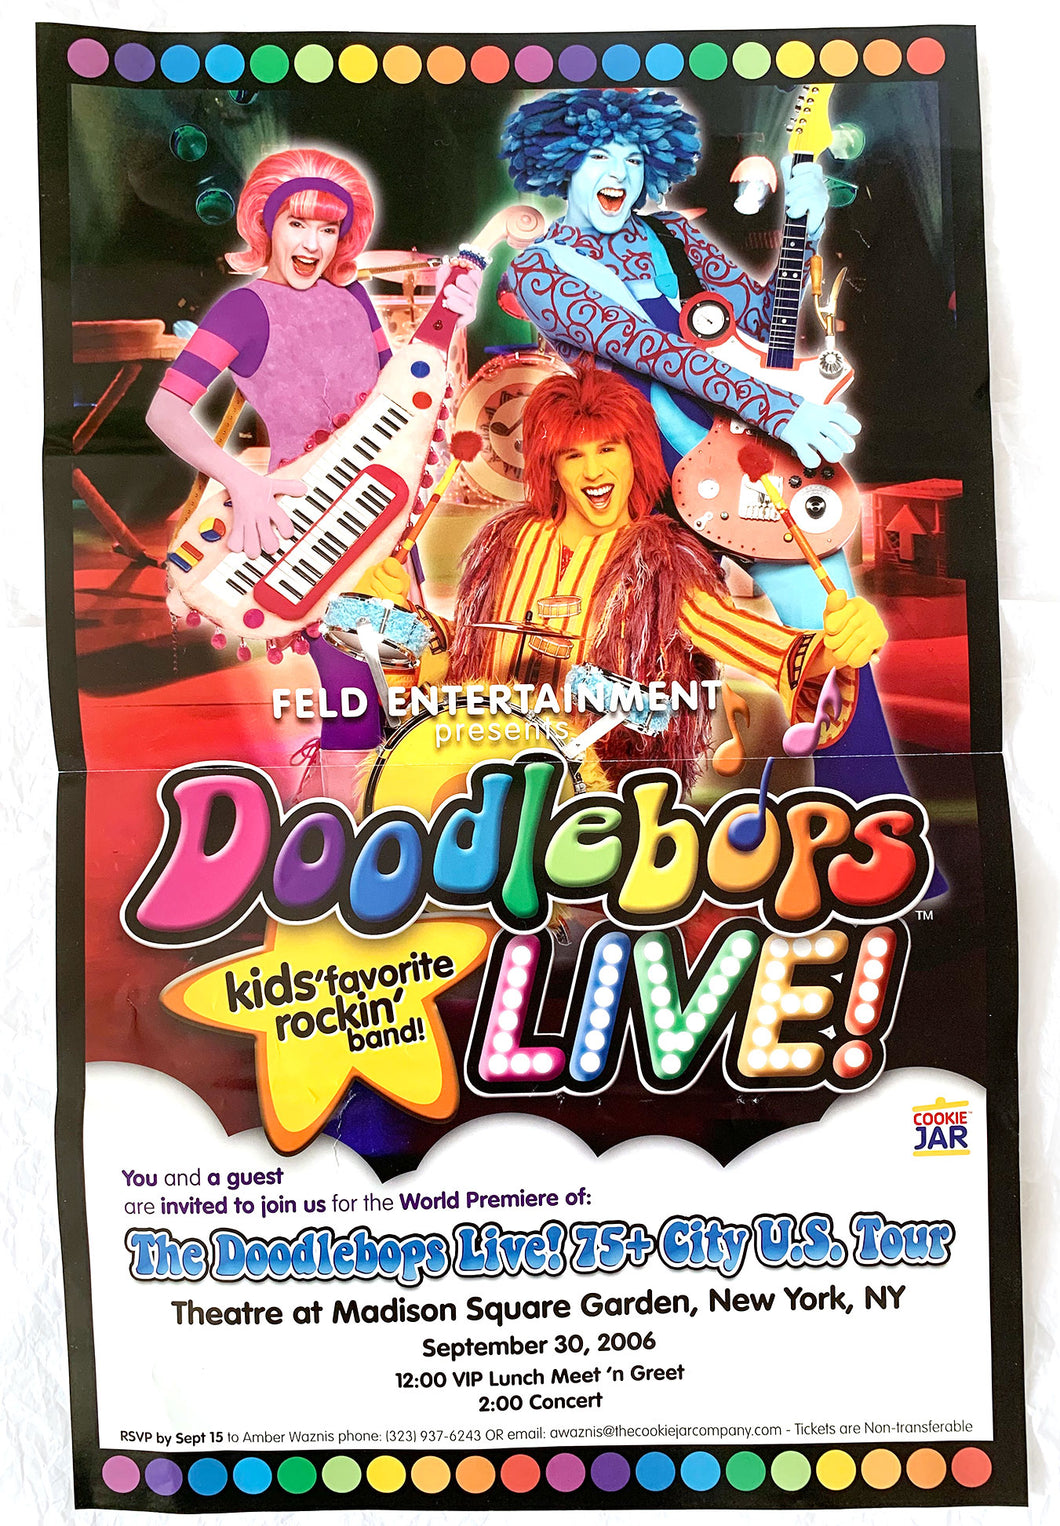 Doodlebops Live! at Madison Square Garden Poster & Tickets